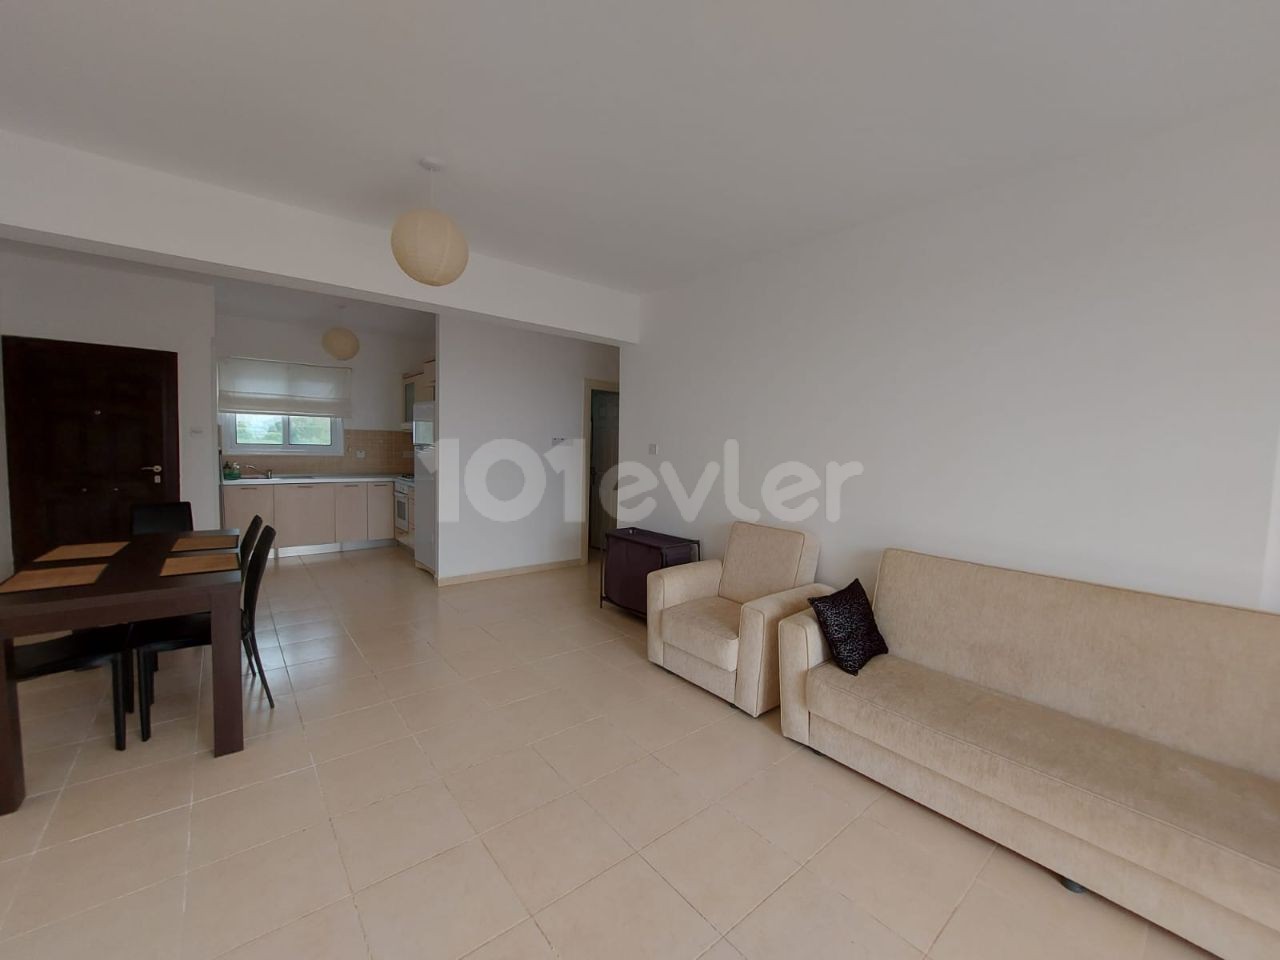 Famagusta - Freshwater. Apartment for sale Sea Terra Reserve sity 2+1. ** 